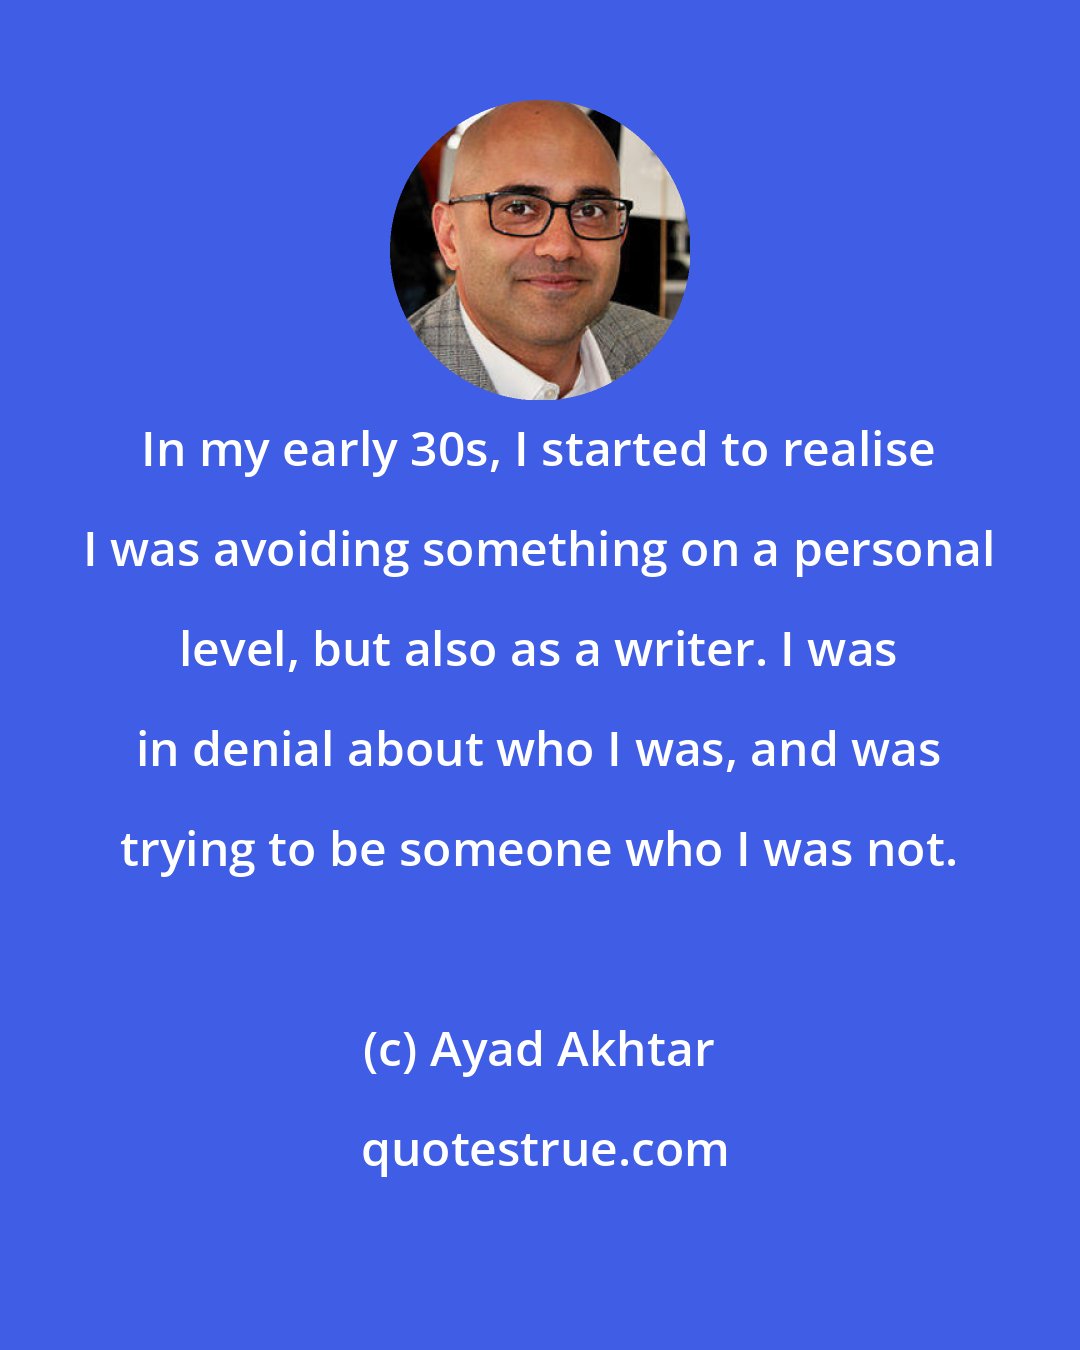 Ayad Akhtar: In my early 30s, I started to realise I was avoiding something on a personal level, but also as a writer. I was in denial about who I was, and was trying to be someone who I was not.